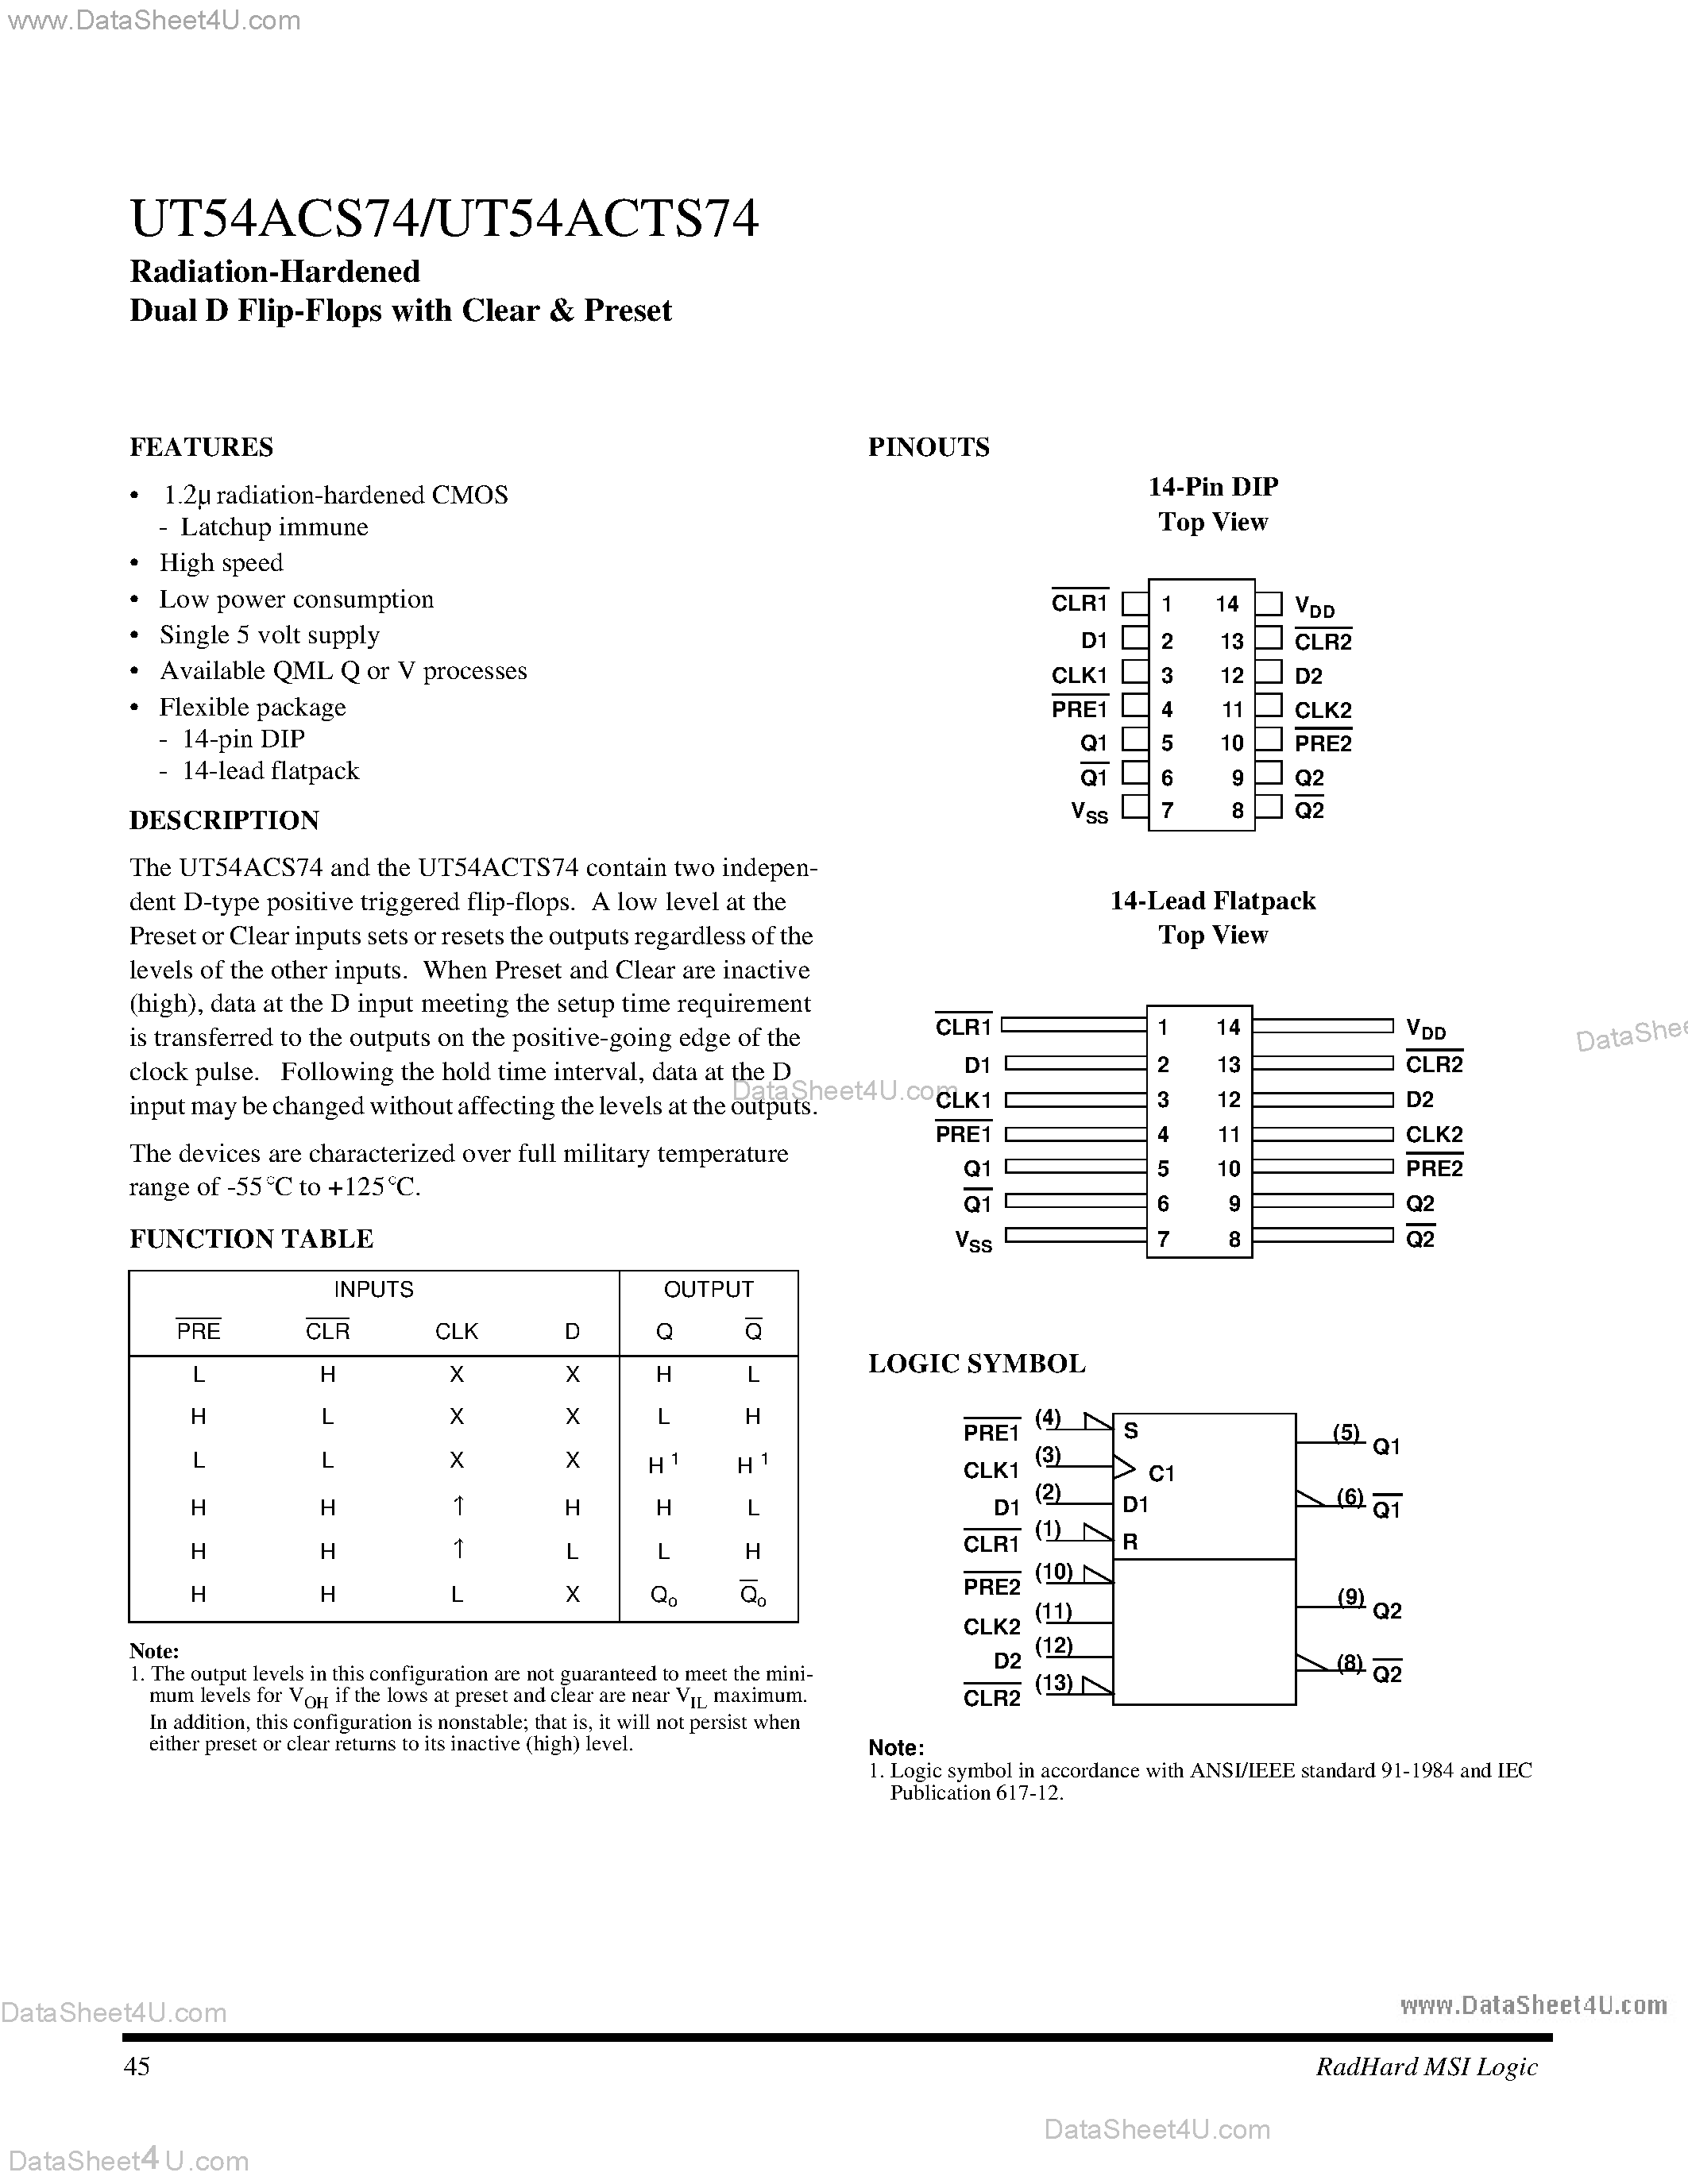 Datasheet UT54ACS74 - Radiation-Hardened Dual D Flip-Flops with Clear & Preset page 1